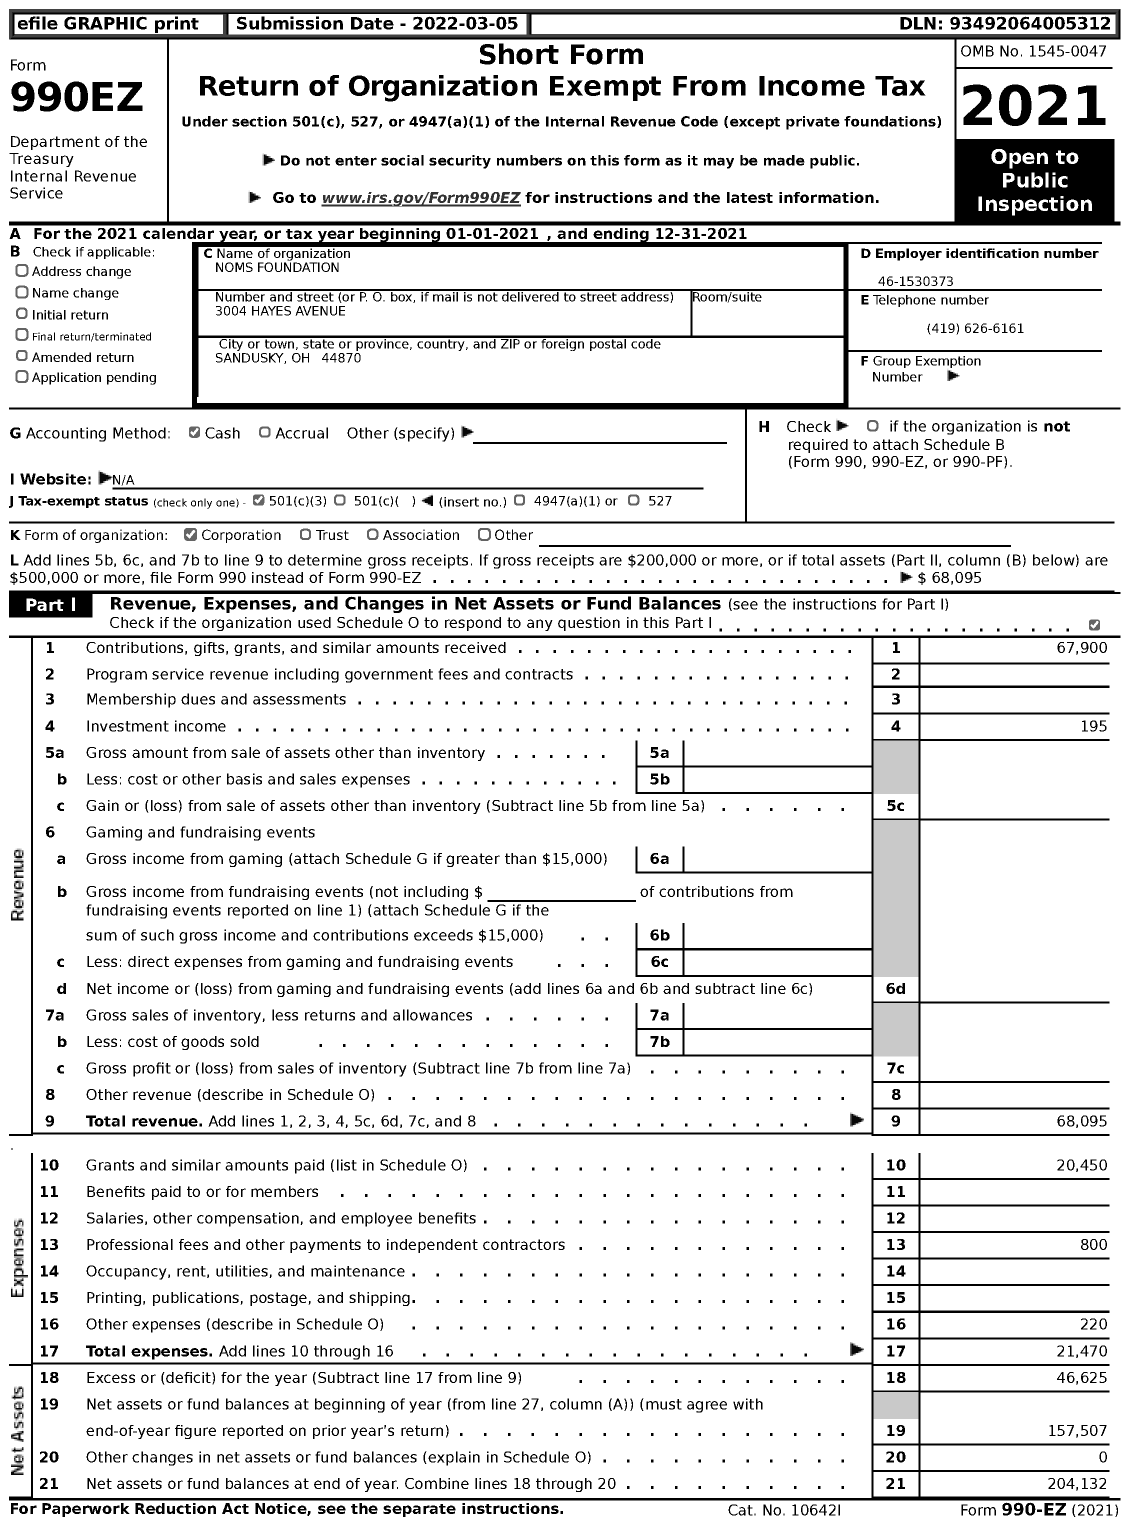 Image of first page of 2021 Form 990EZ for Noms Foundation